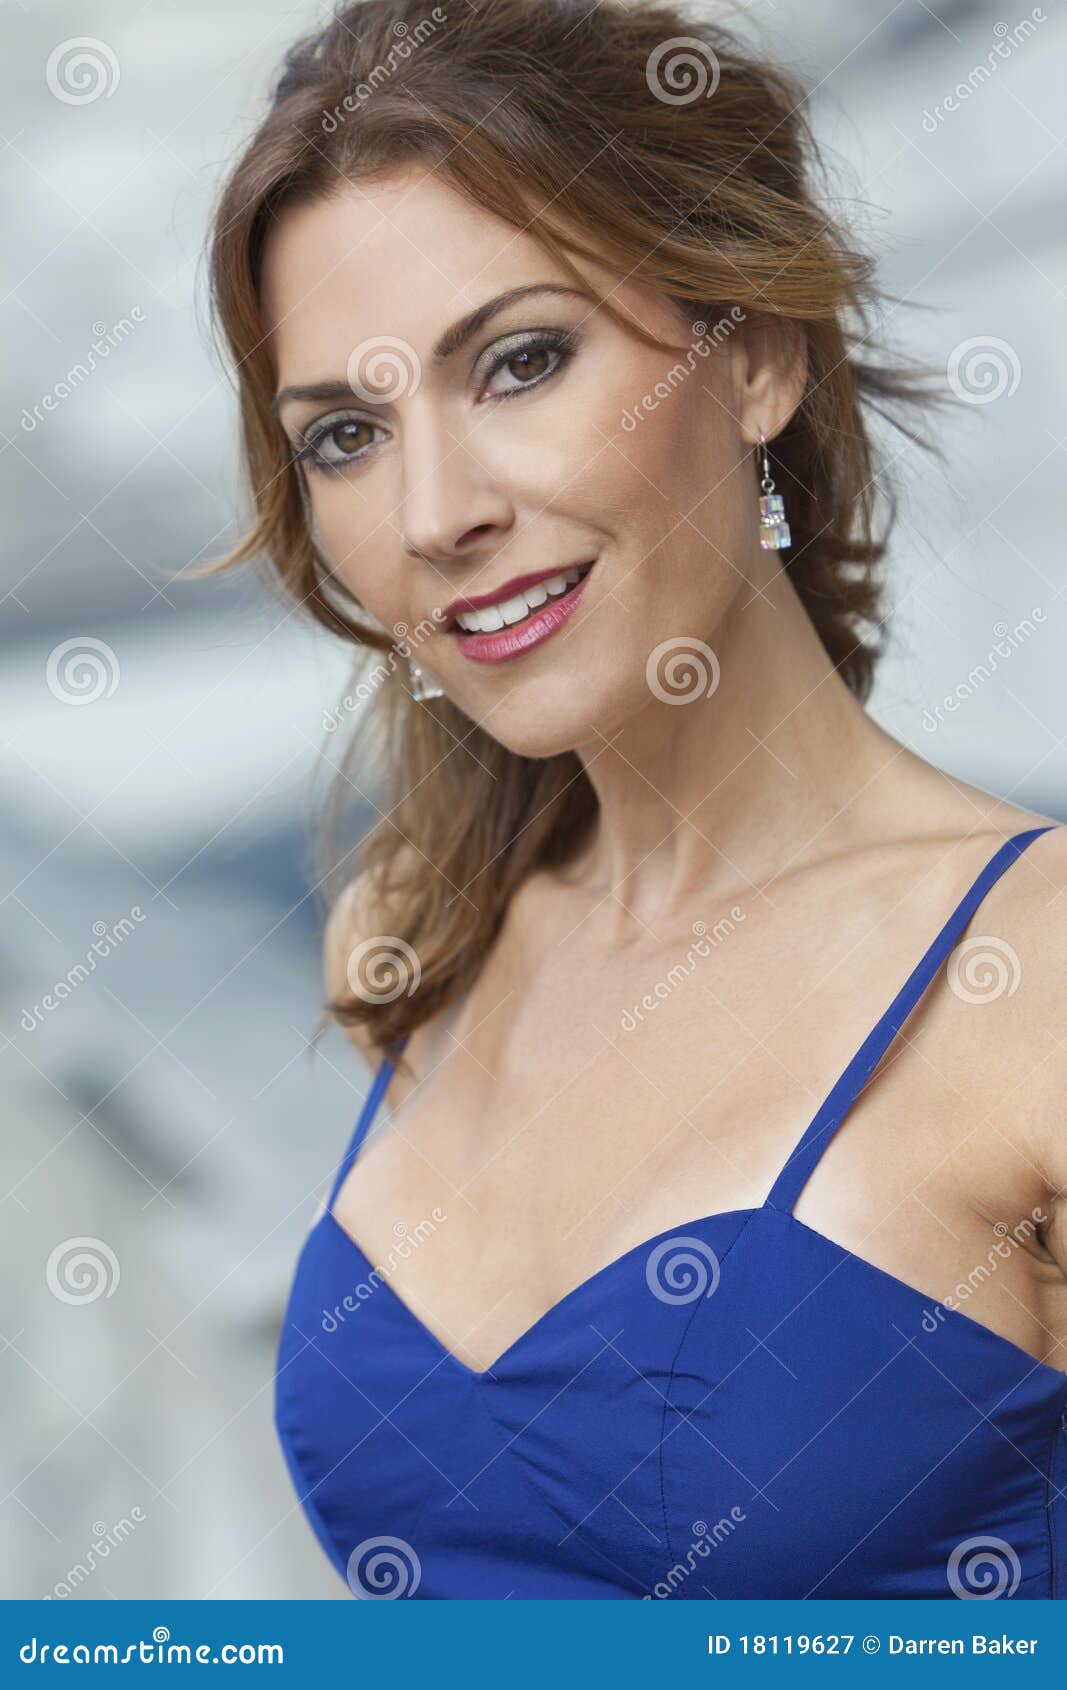 portrait of a beautiful woman in her thirties